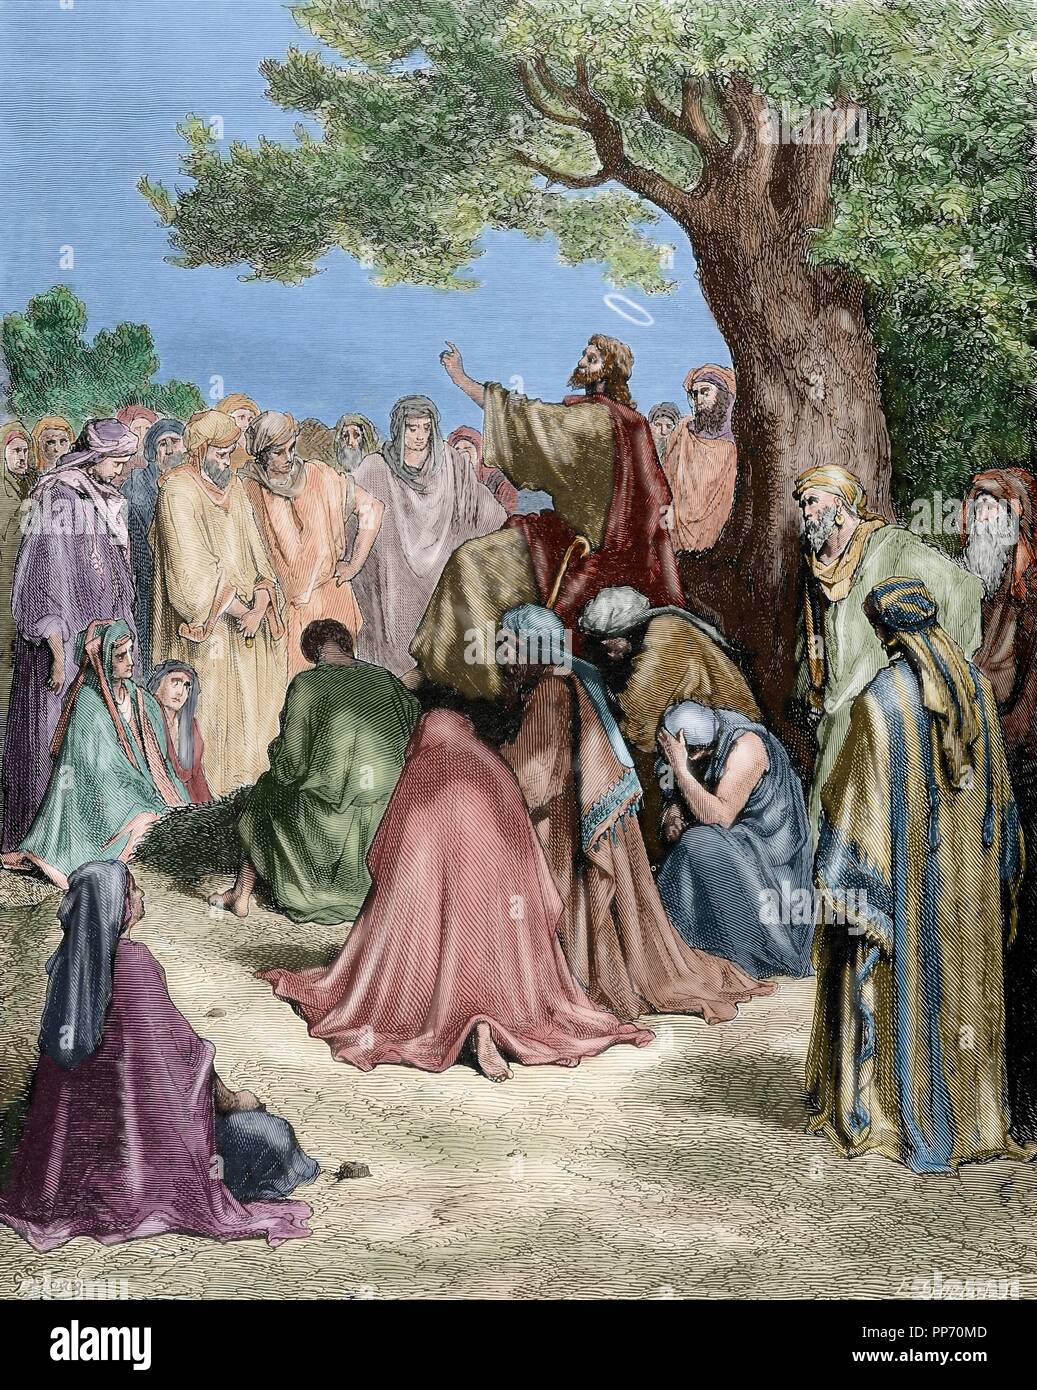 New Testament. Jesus preaching to the crowd. Gospel of Matthew, Chapter IV, Verses 17-22. Engraving. 19th century. Colored. Stock Photo